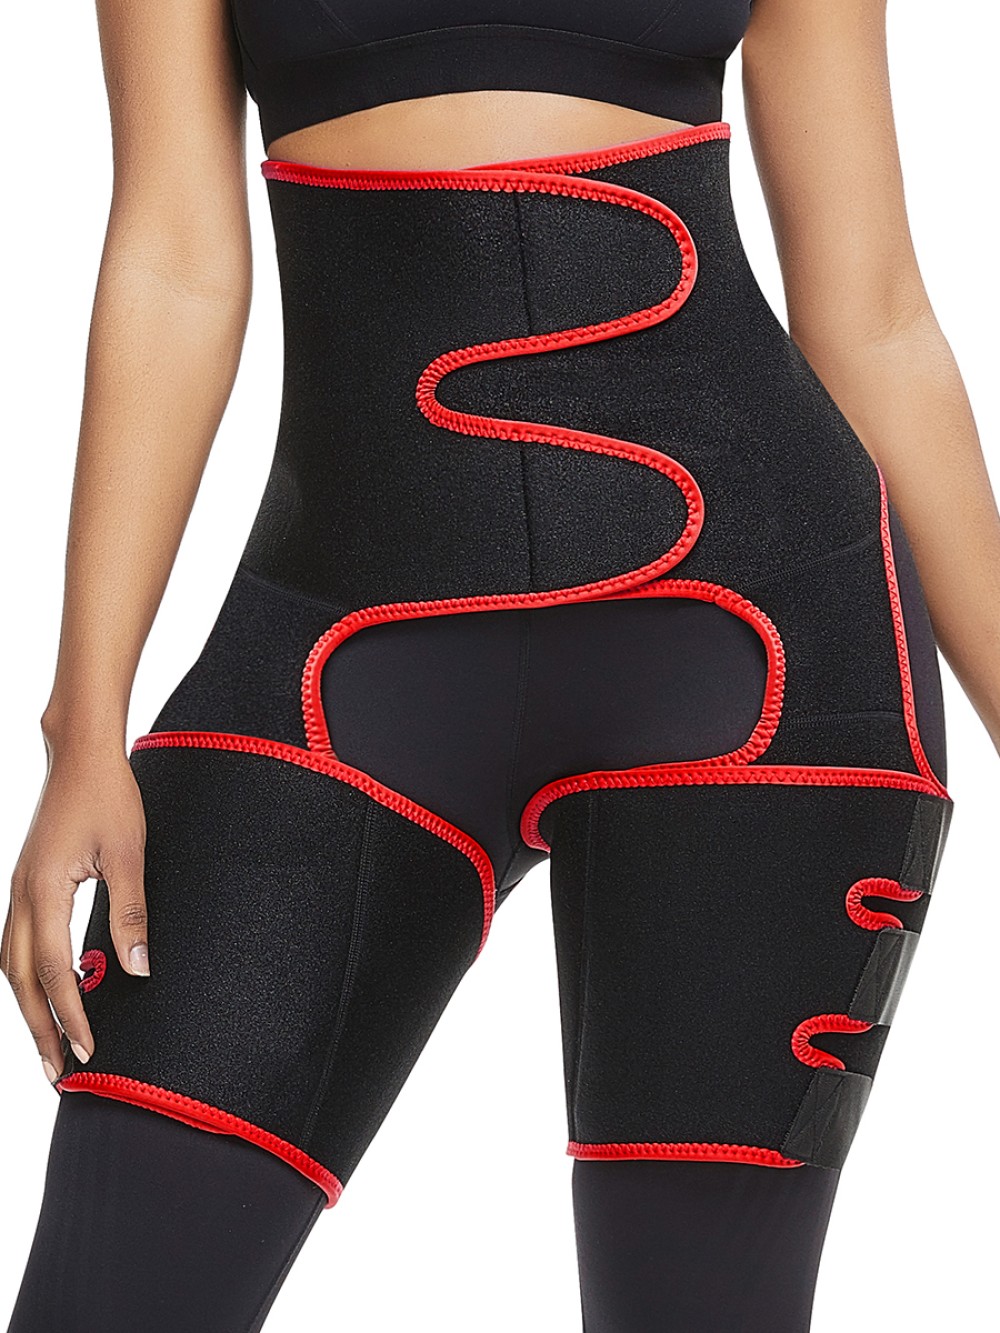 Red Neoprene 2-In-1 Waist And Thigh Shaper Abdominal Control